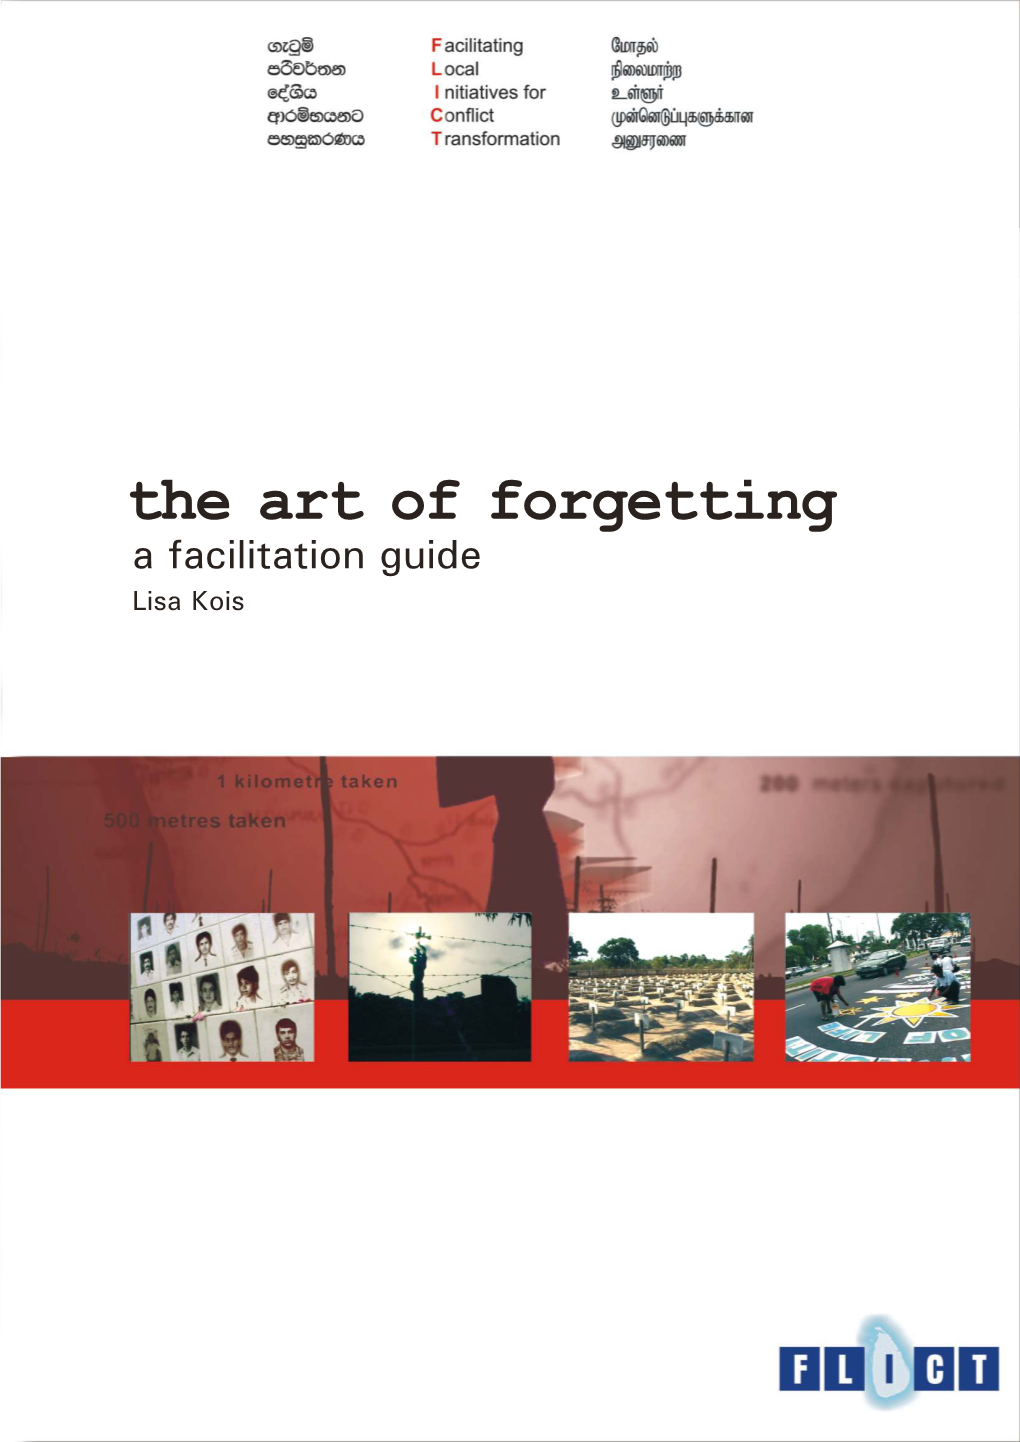 The Art of Forgetting Foreword Background